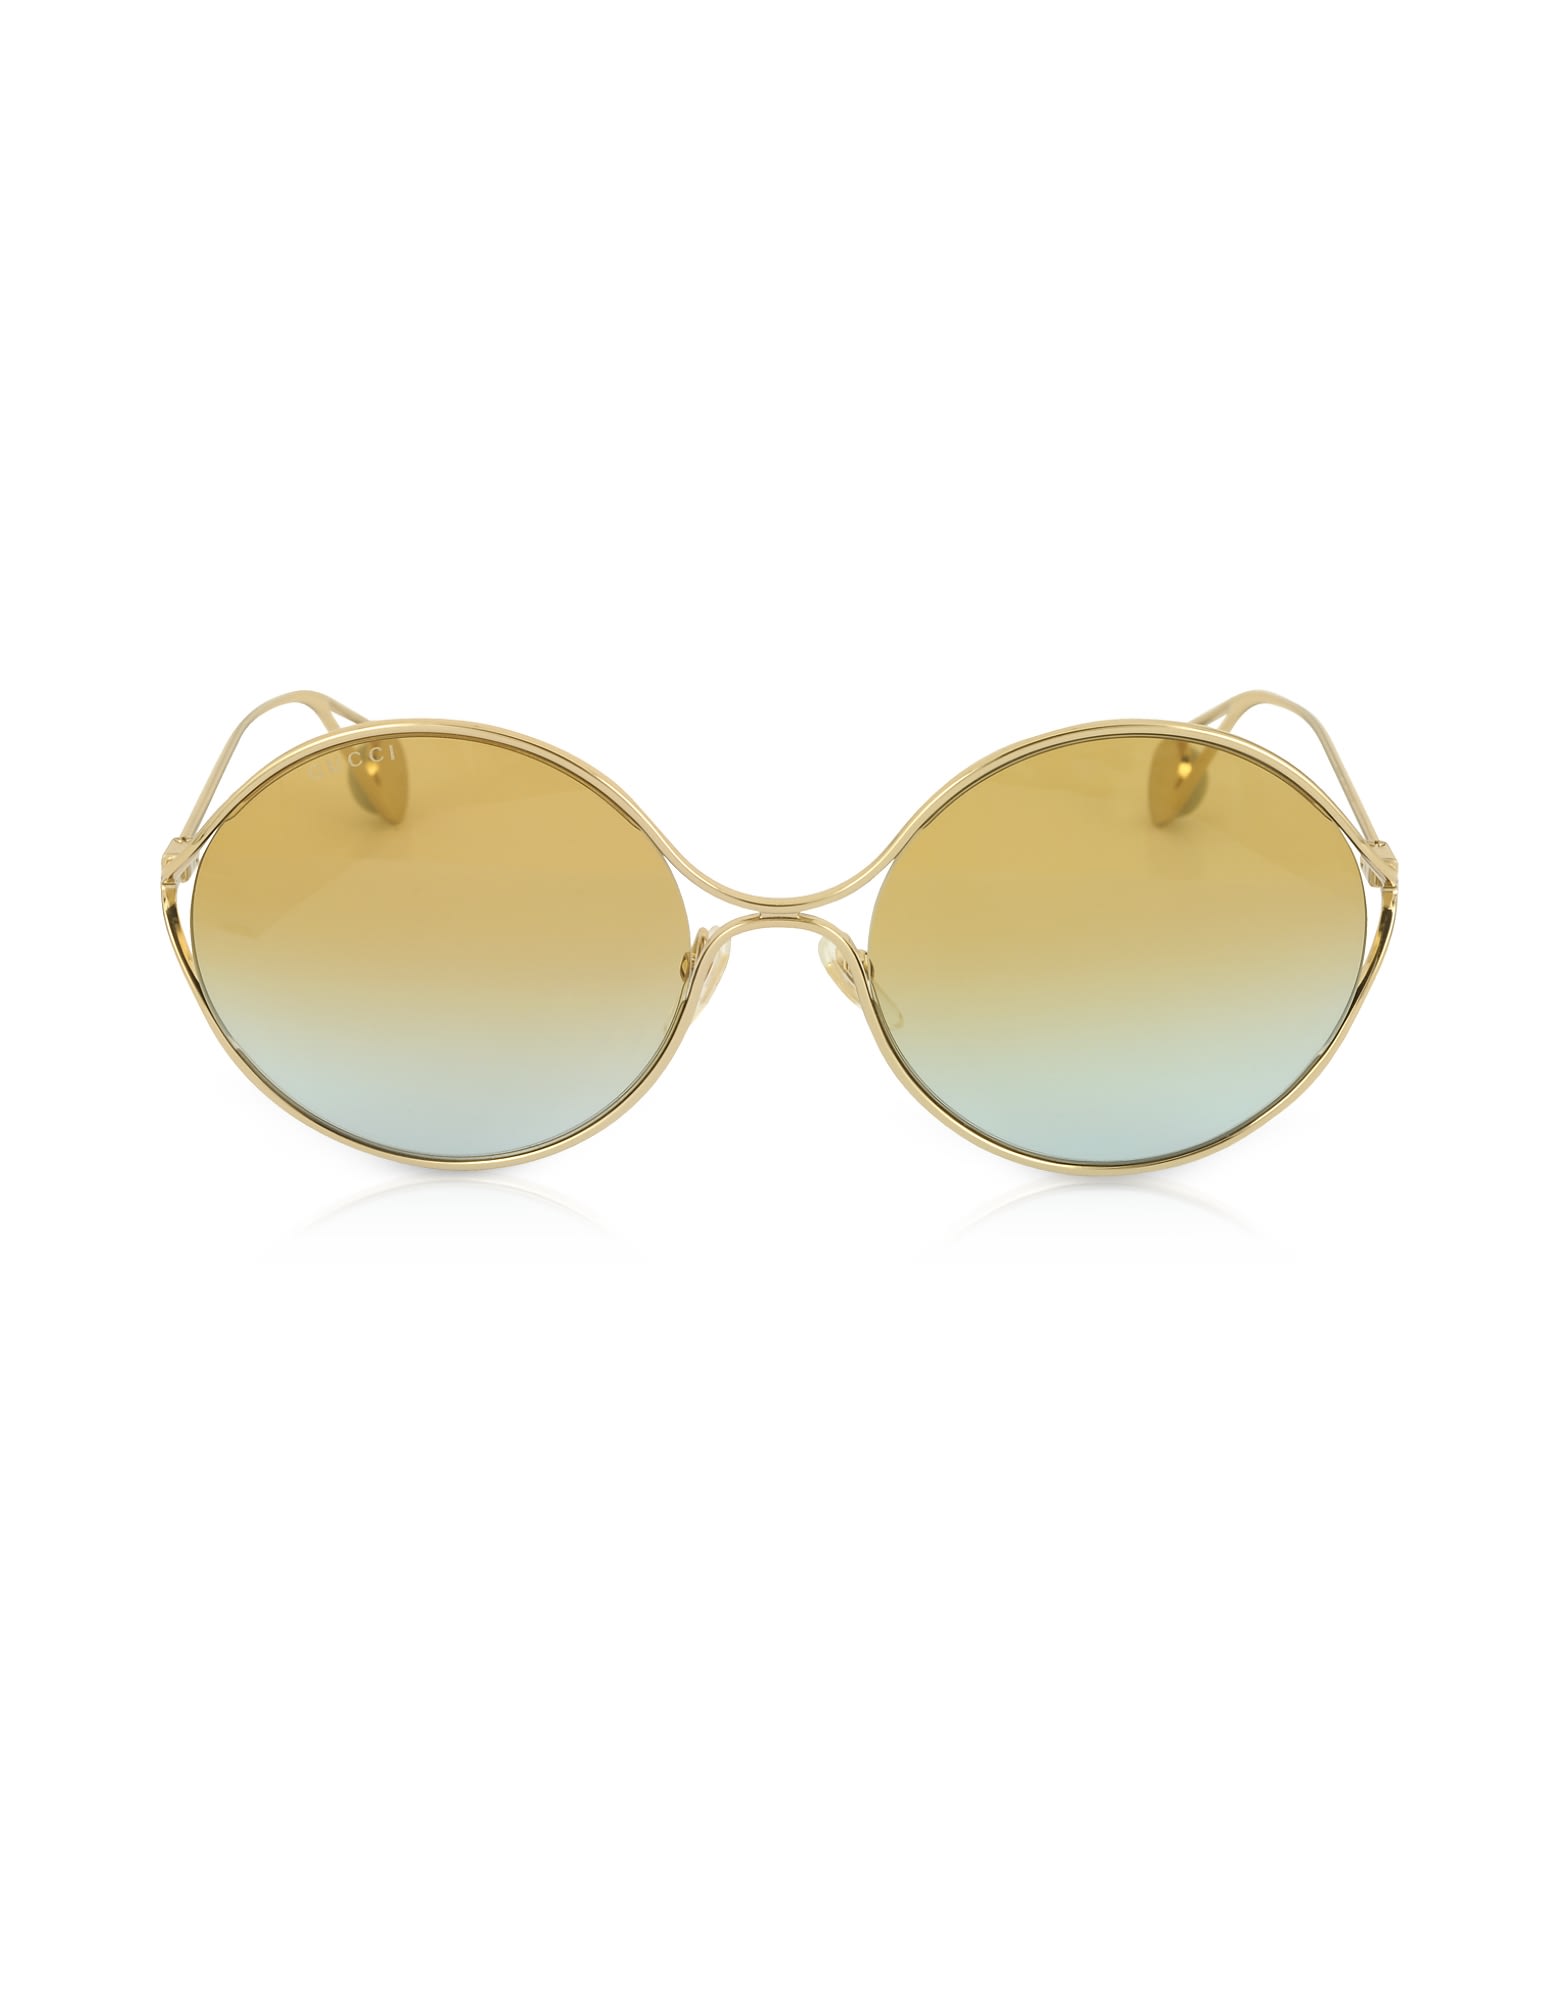 GUCCI GG0253S ROUND-FRAME METAL SUNGLASSES W/GG PEARLS,11243422